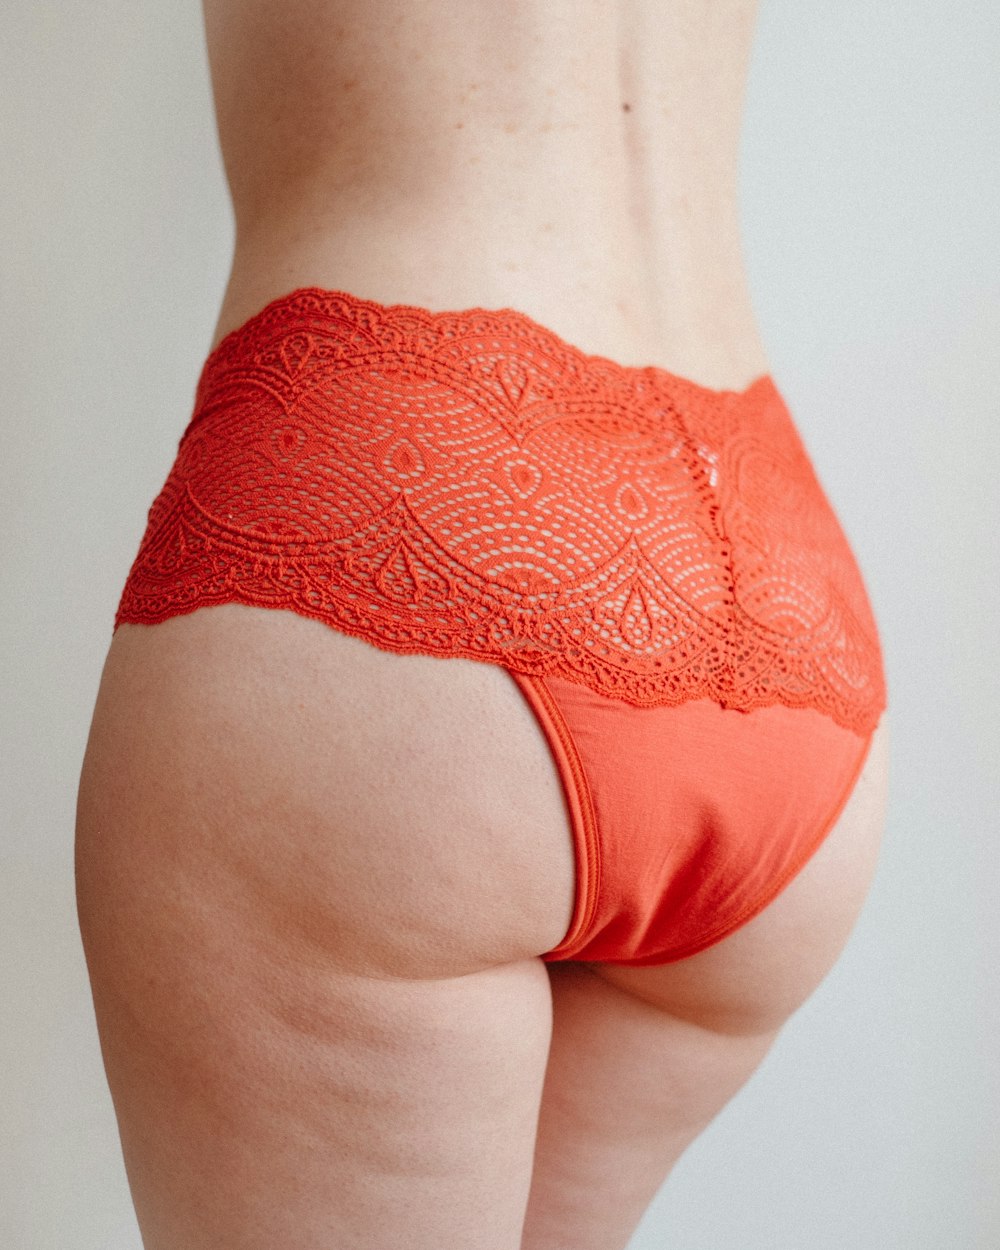 a woman's butt with a lacy orange panties